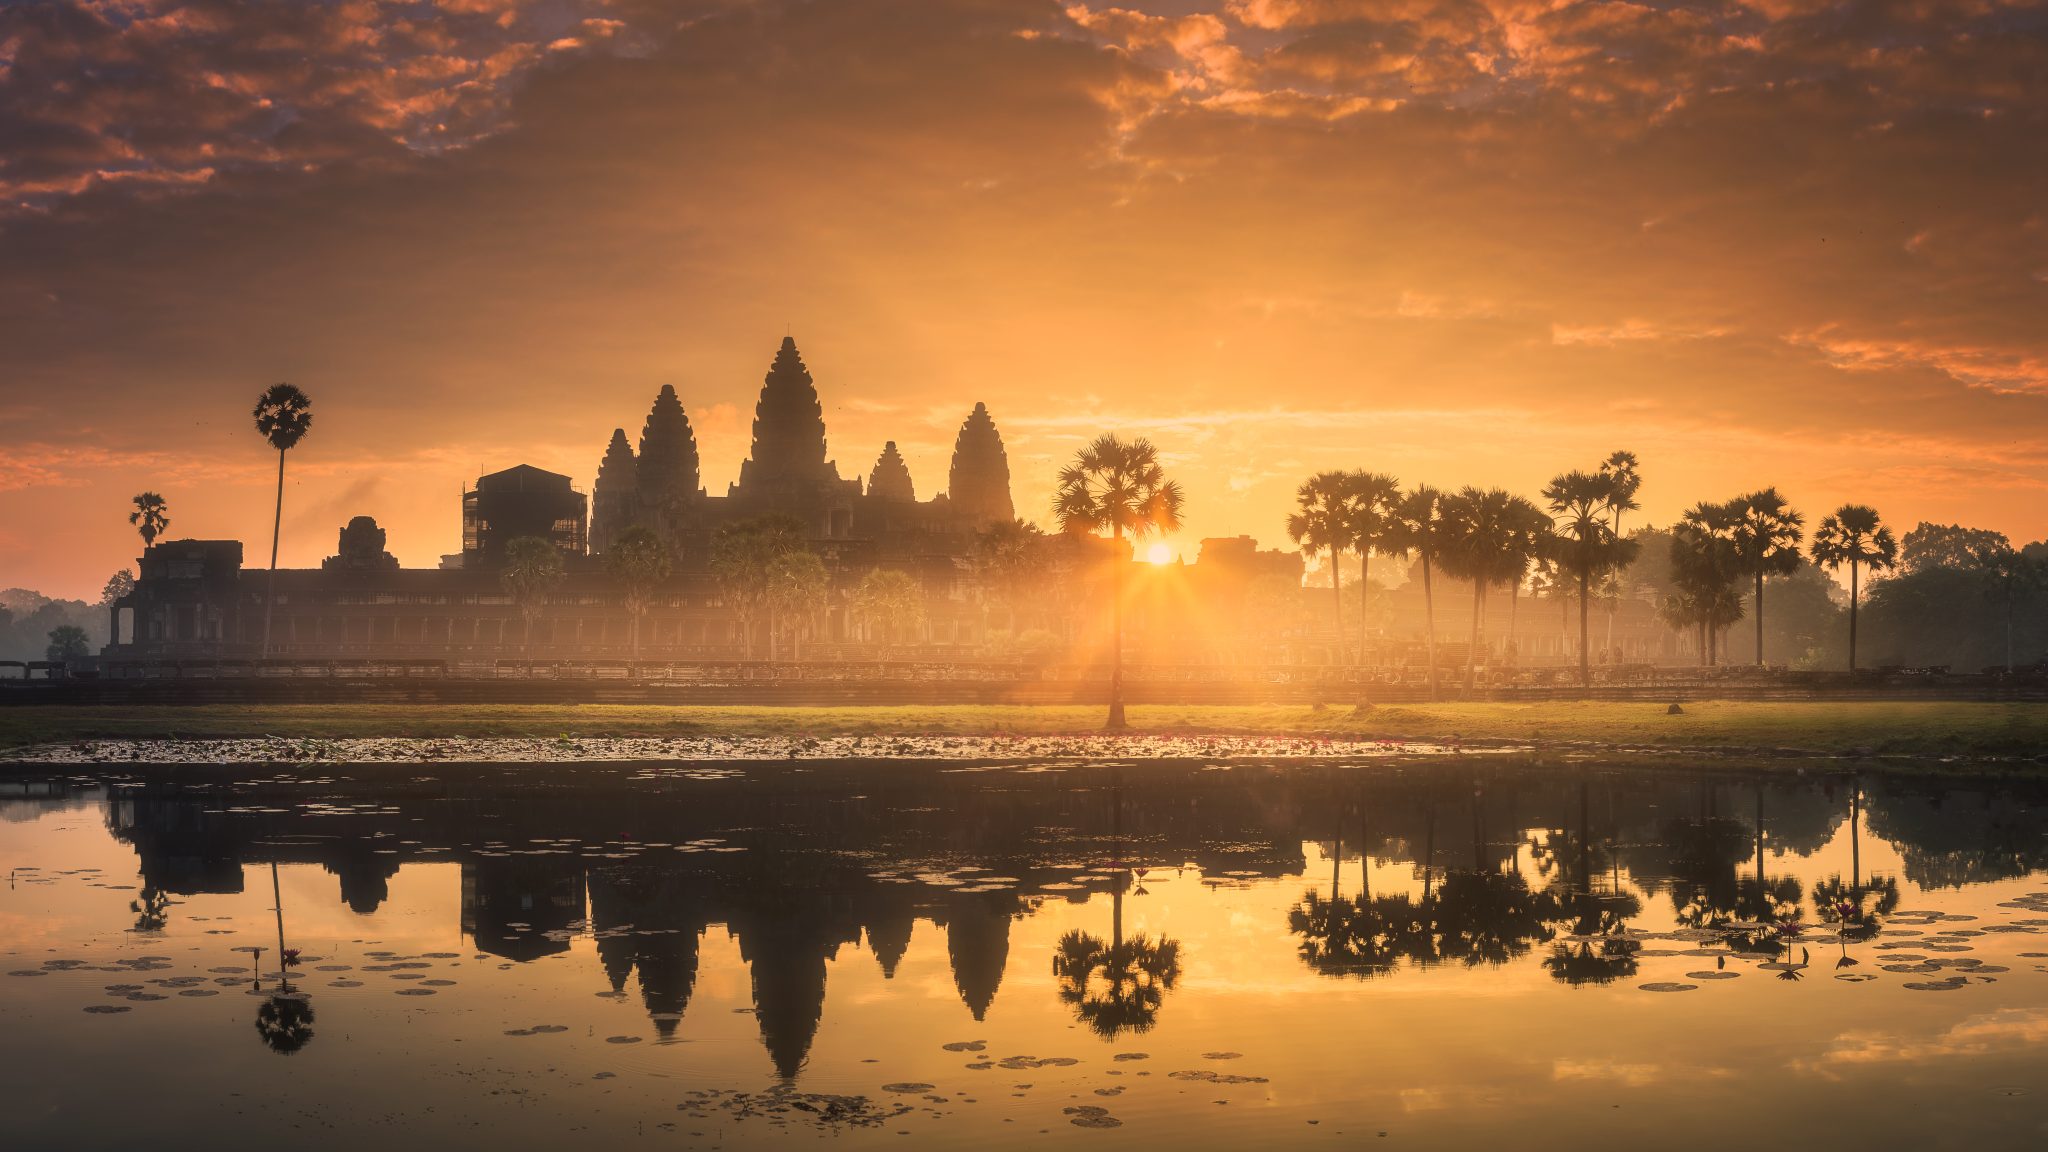 First Timer’s Guide to Angkor Wat